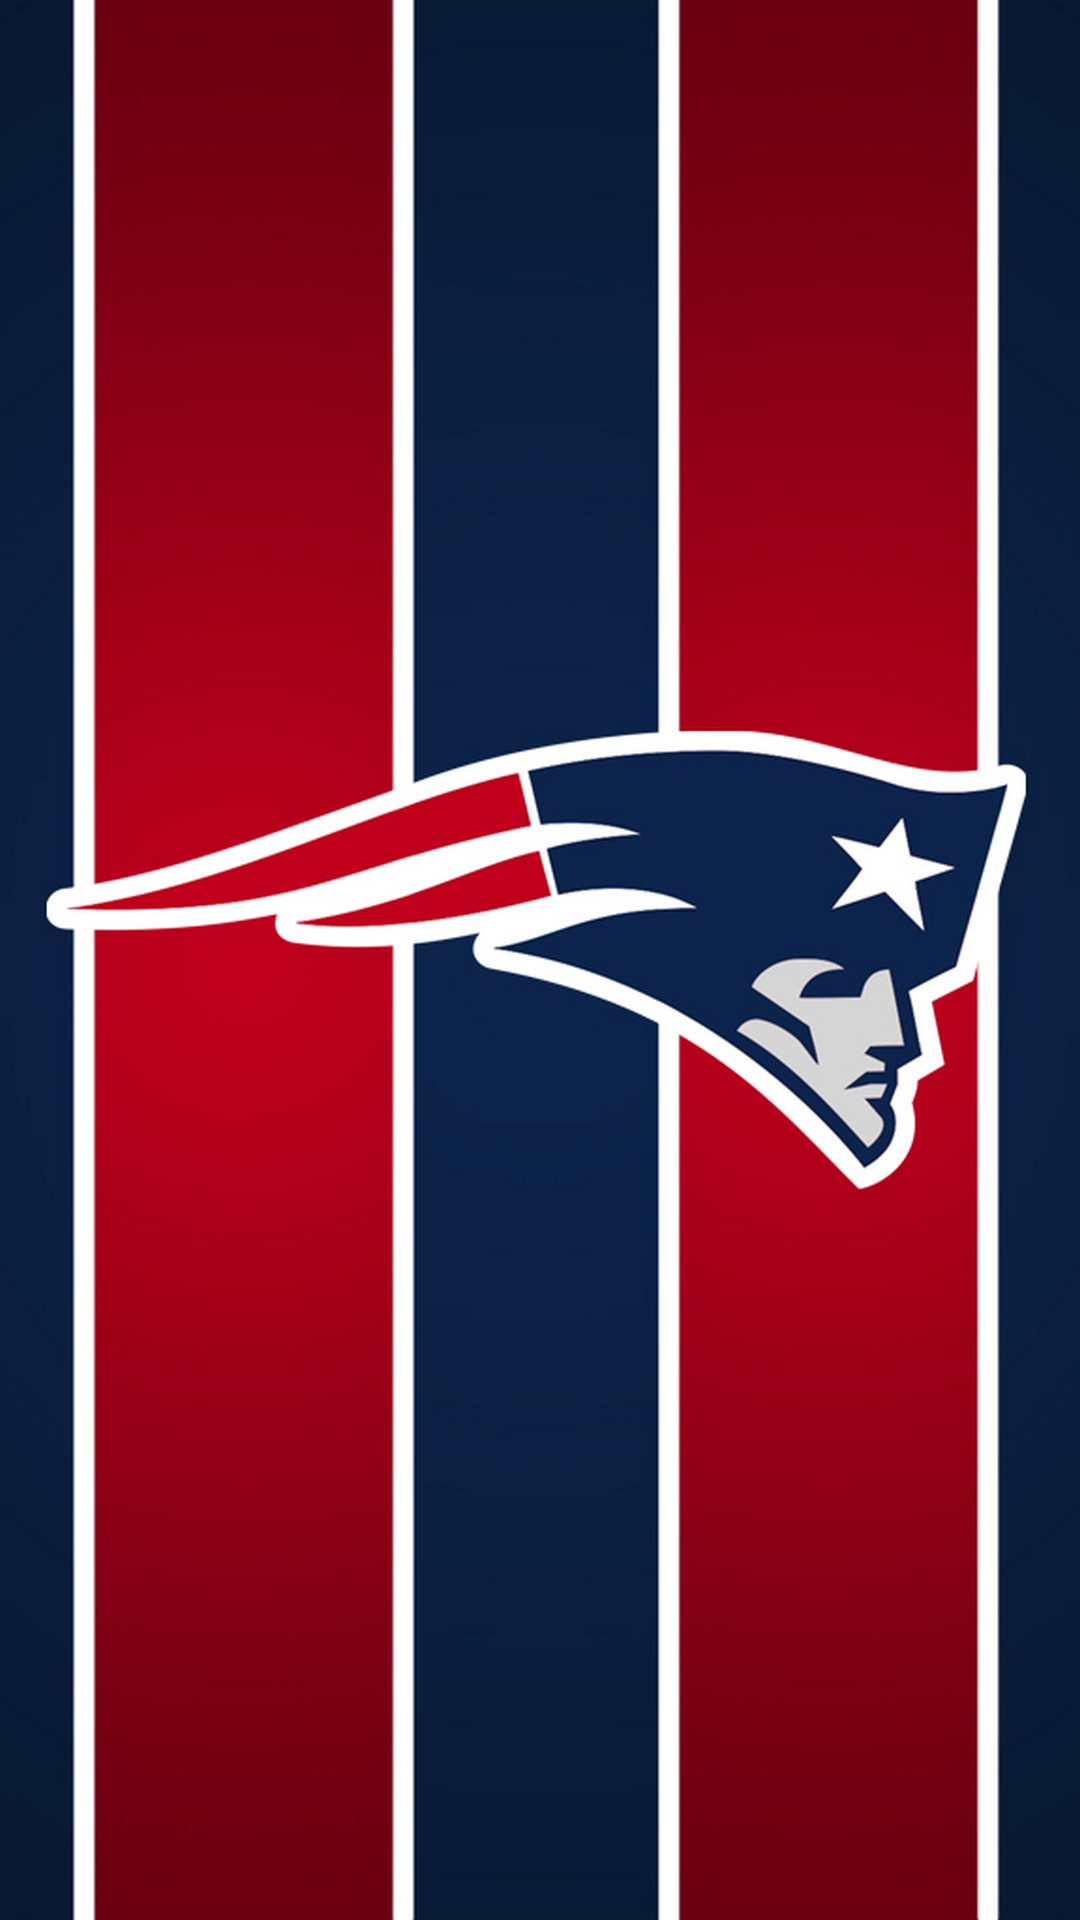 New England Patriots iPhone XS Wallpaper with high-resolution 1080x1920 pixel. Download and set as wallpaper for Apple iPhone X, XS Max, XR, 8, 7, 6, SE, iPad, Android